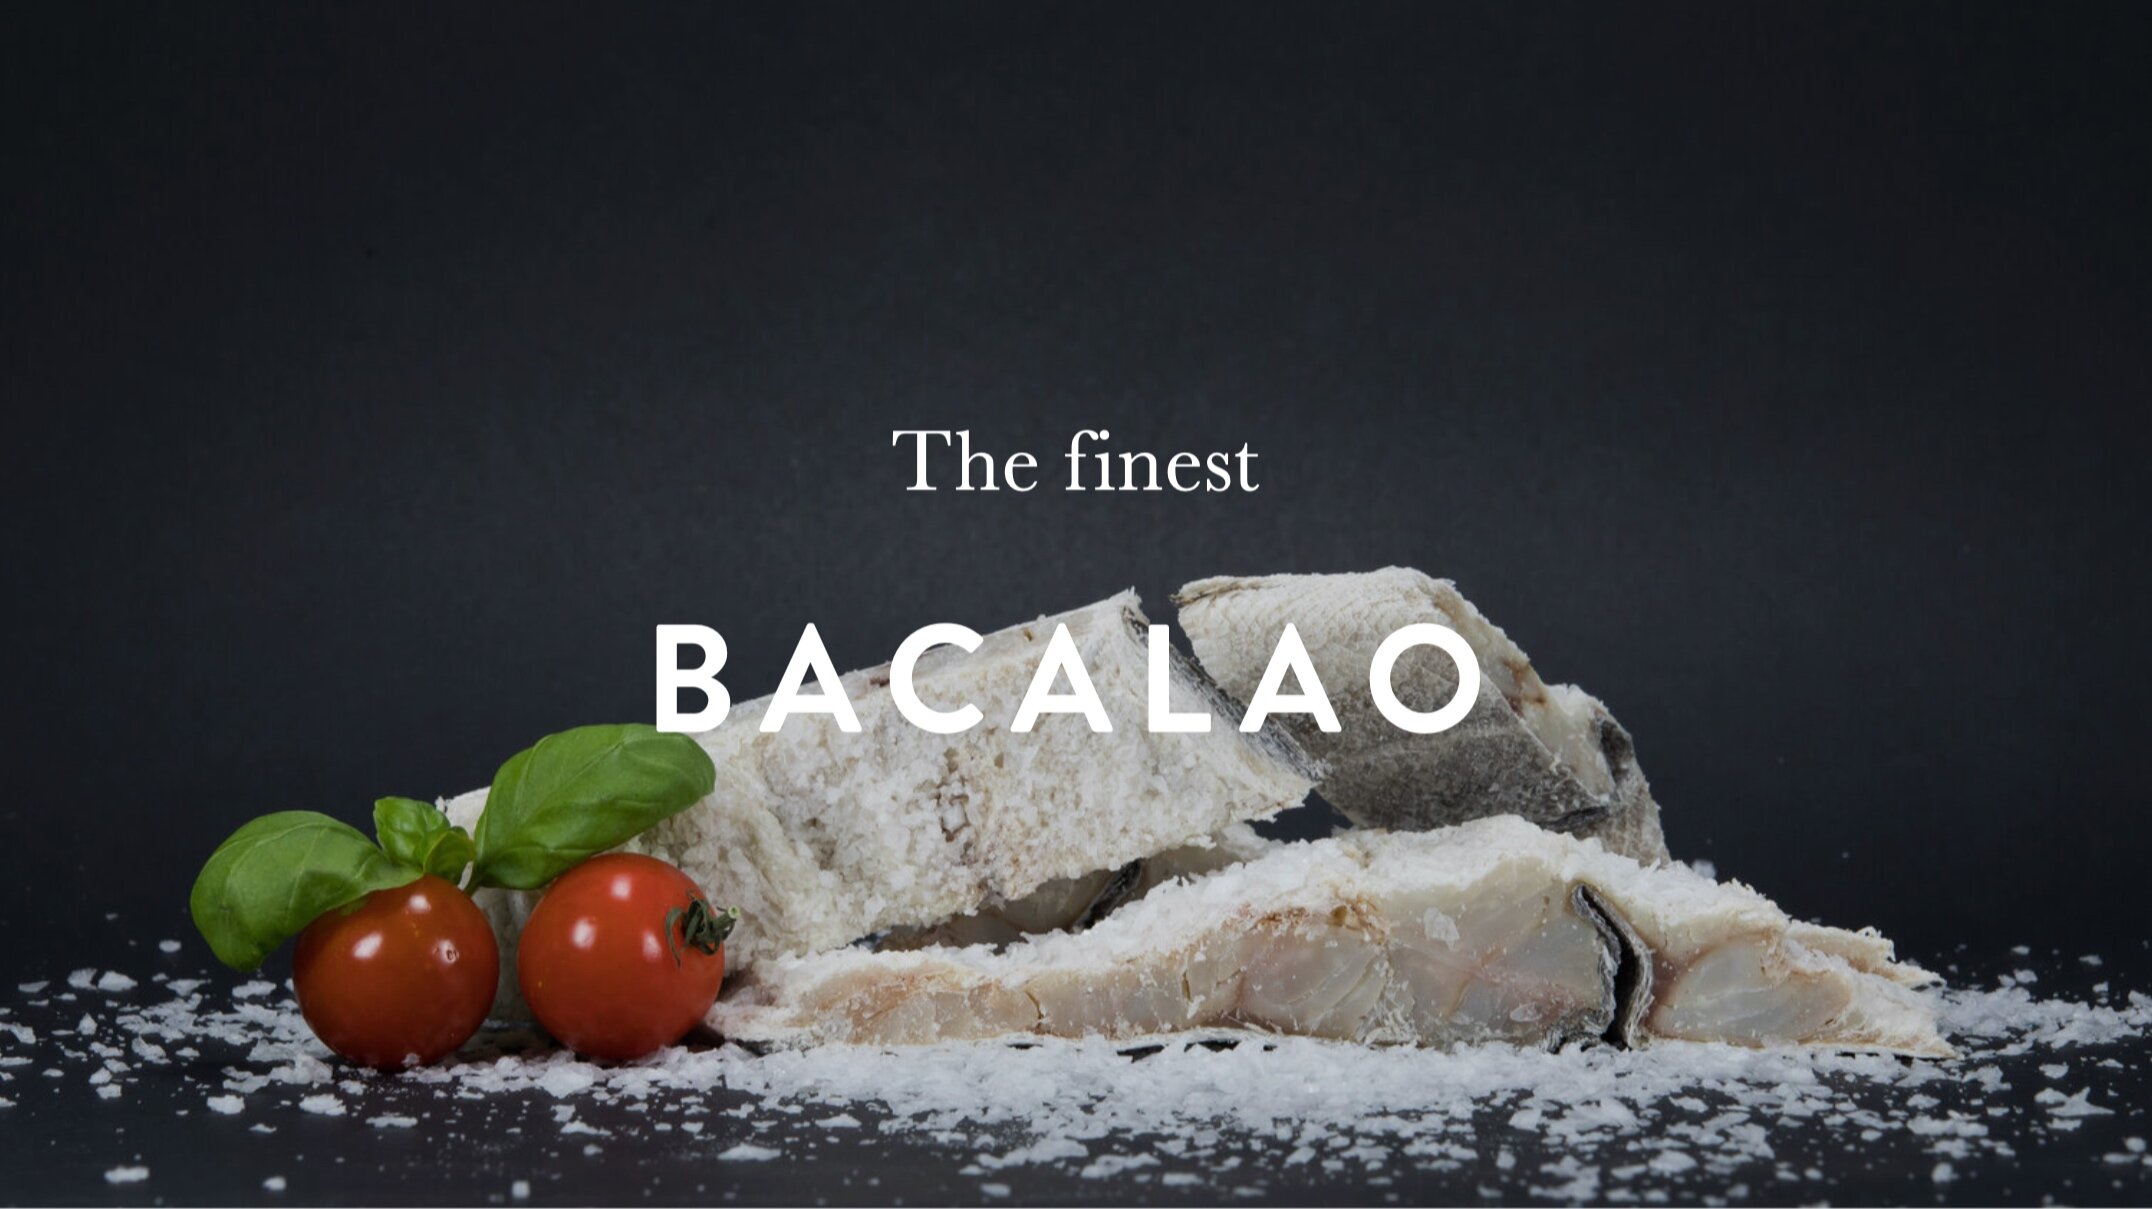 The finest bacalao